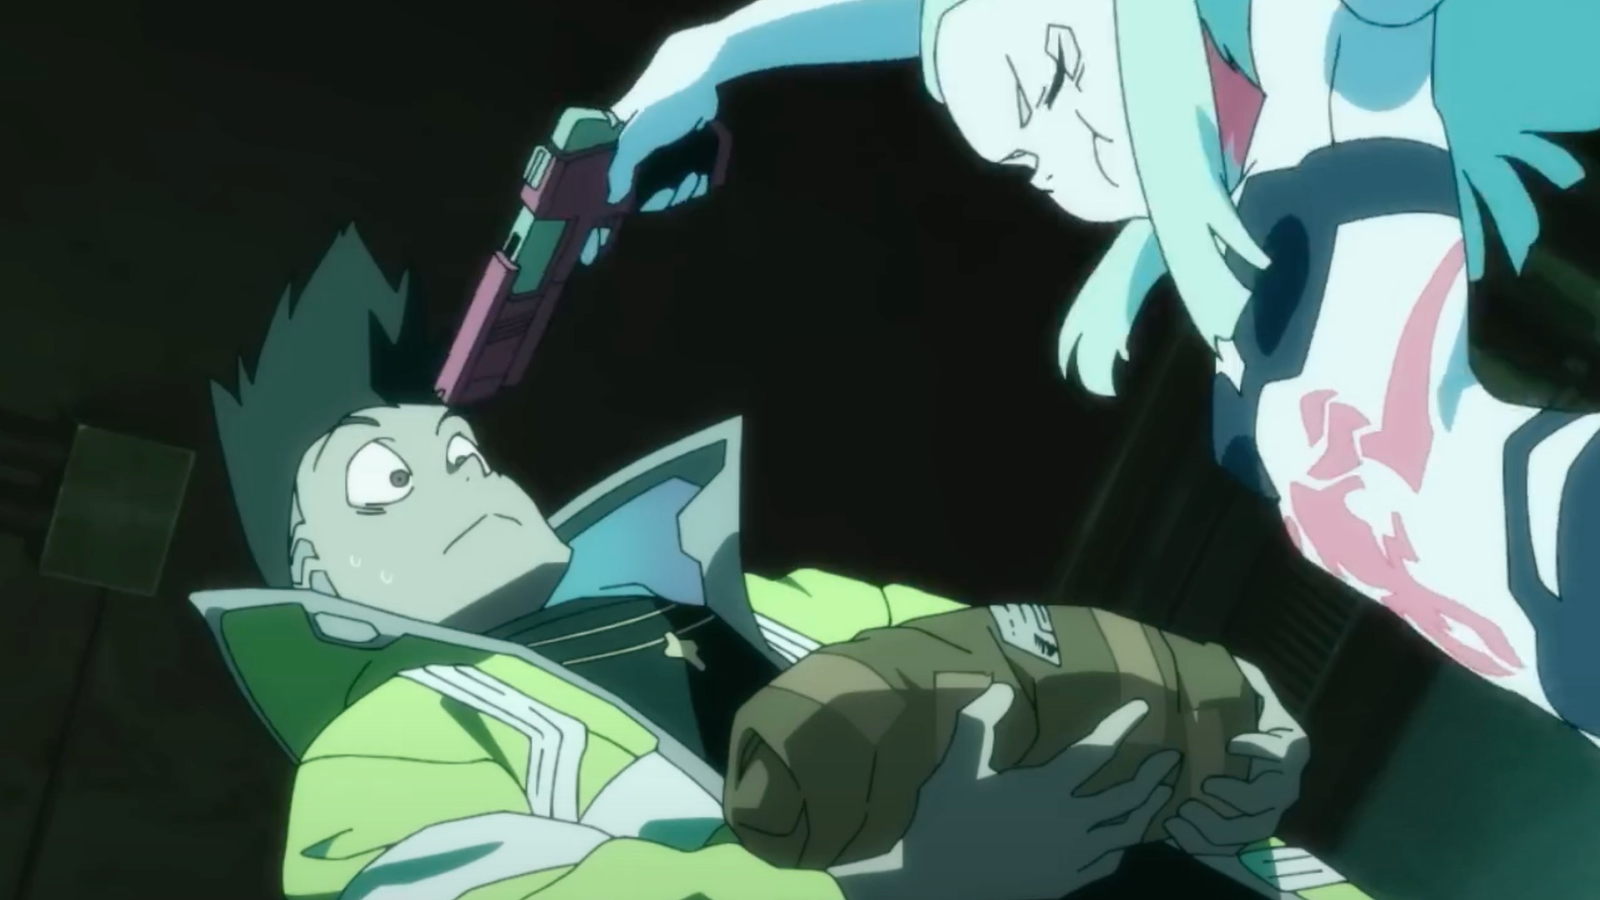 CD Projekt and Studio Trigger release a new trailer for Cyberpunk: Edgerunners  anime series